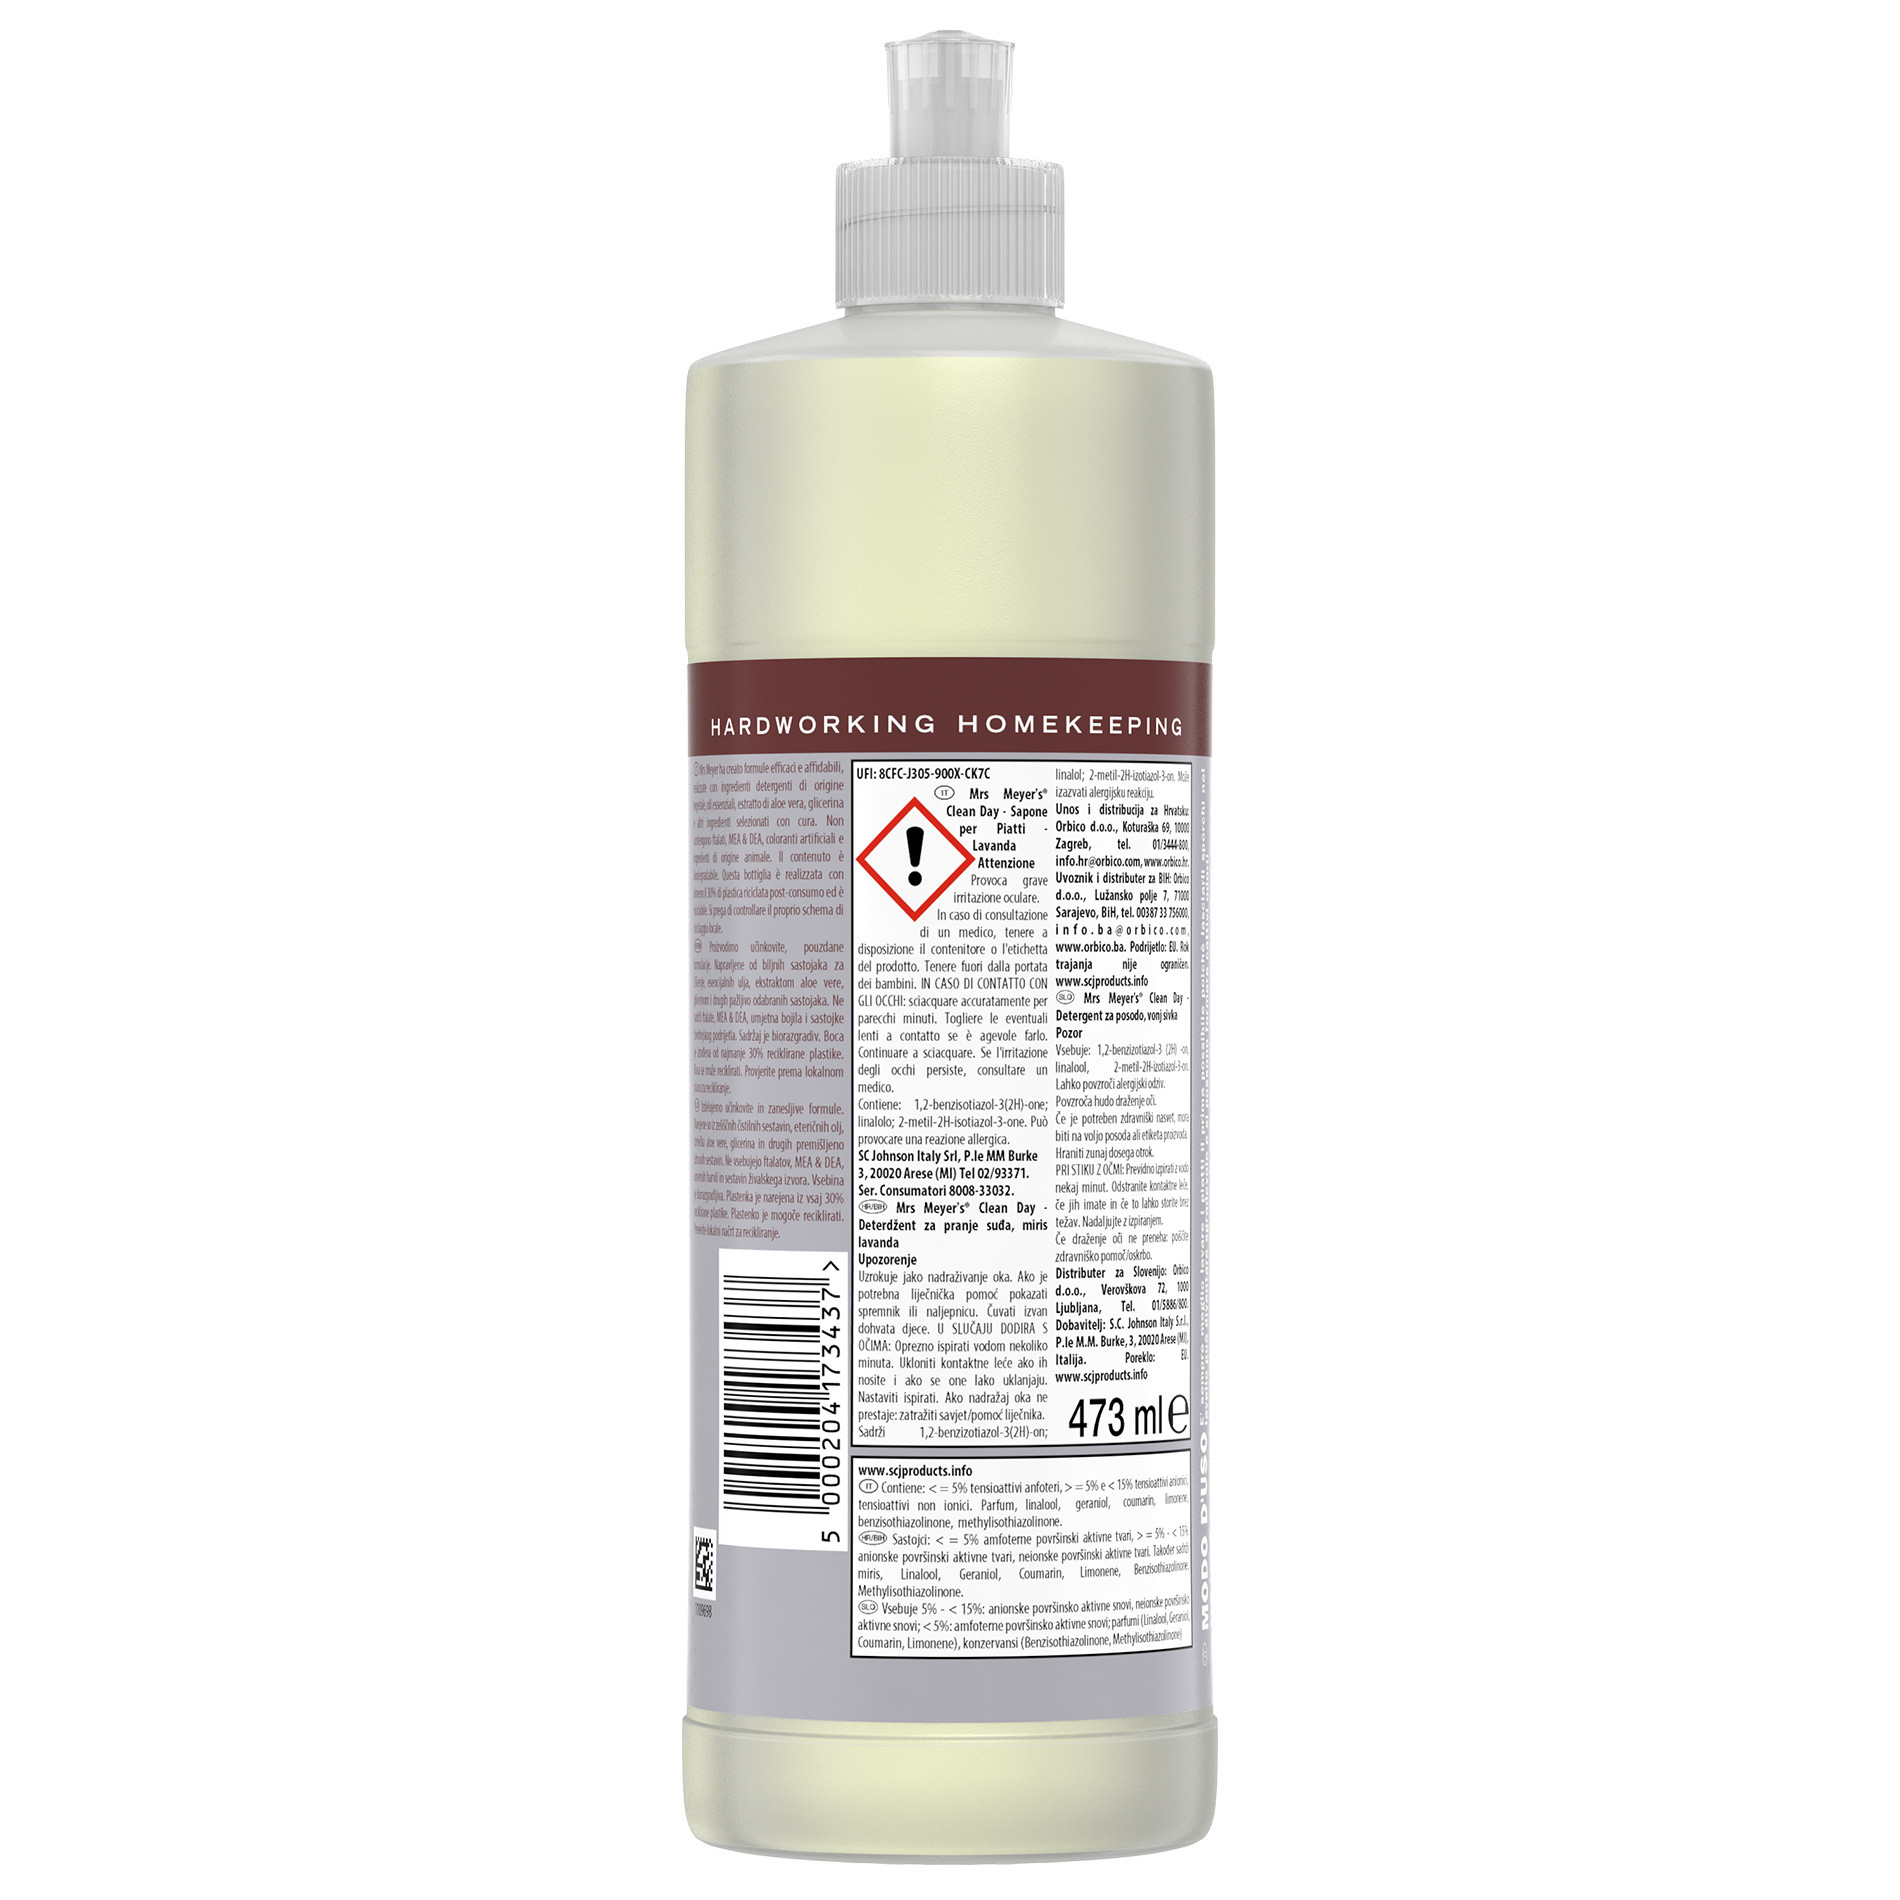 Dish soap with lavender scent 473ml, Grey, large image number 1